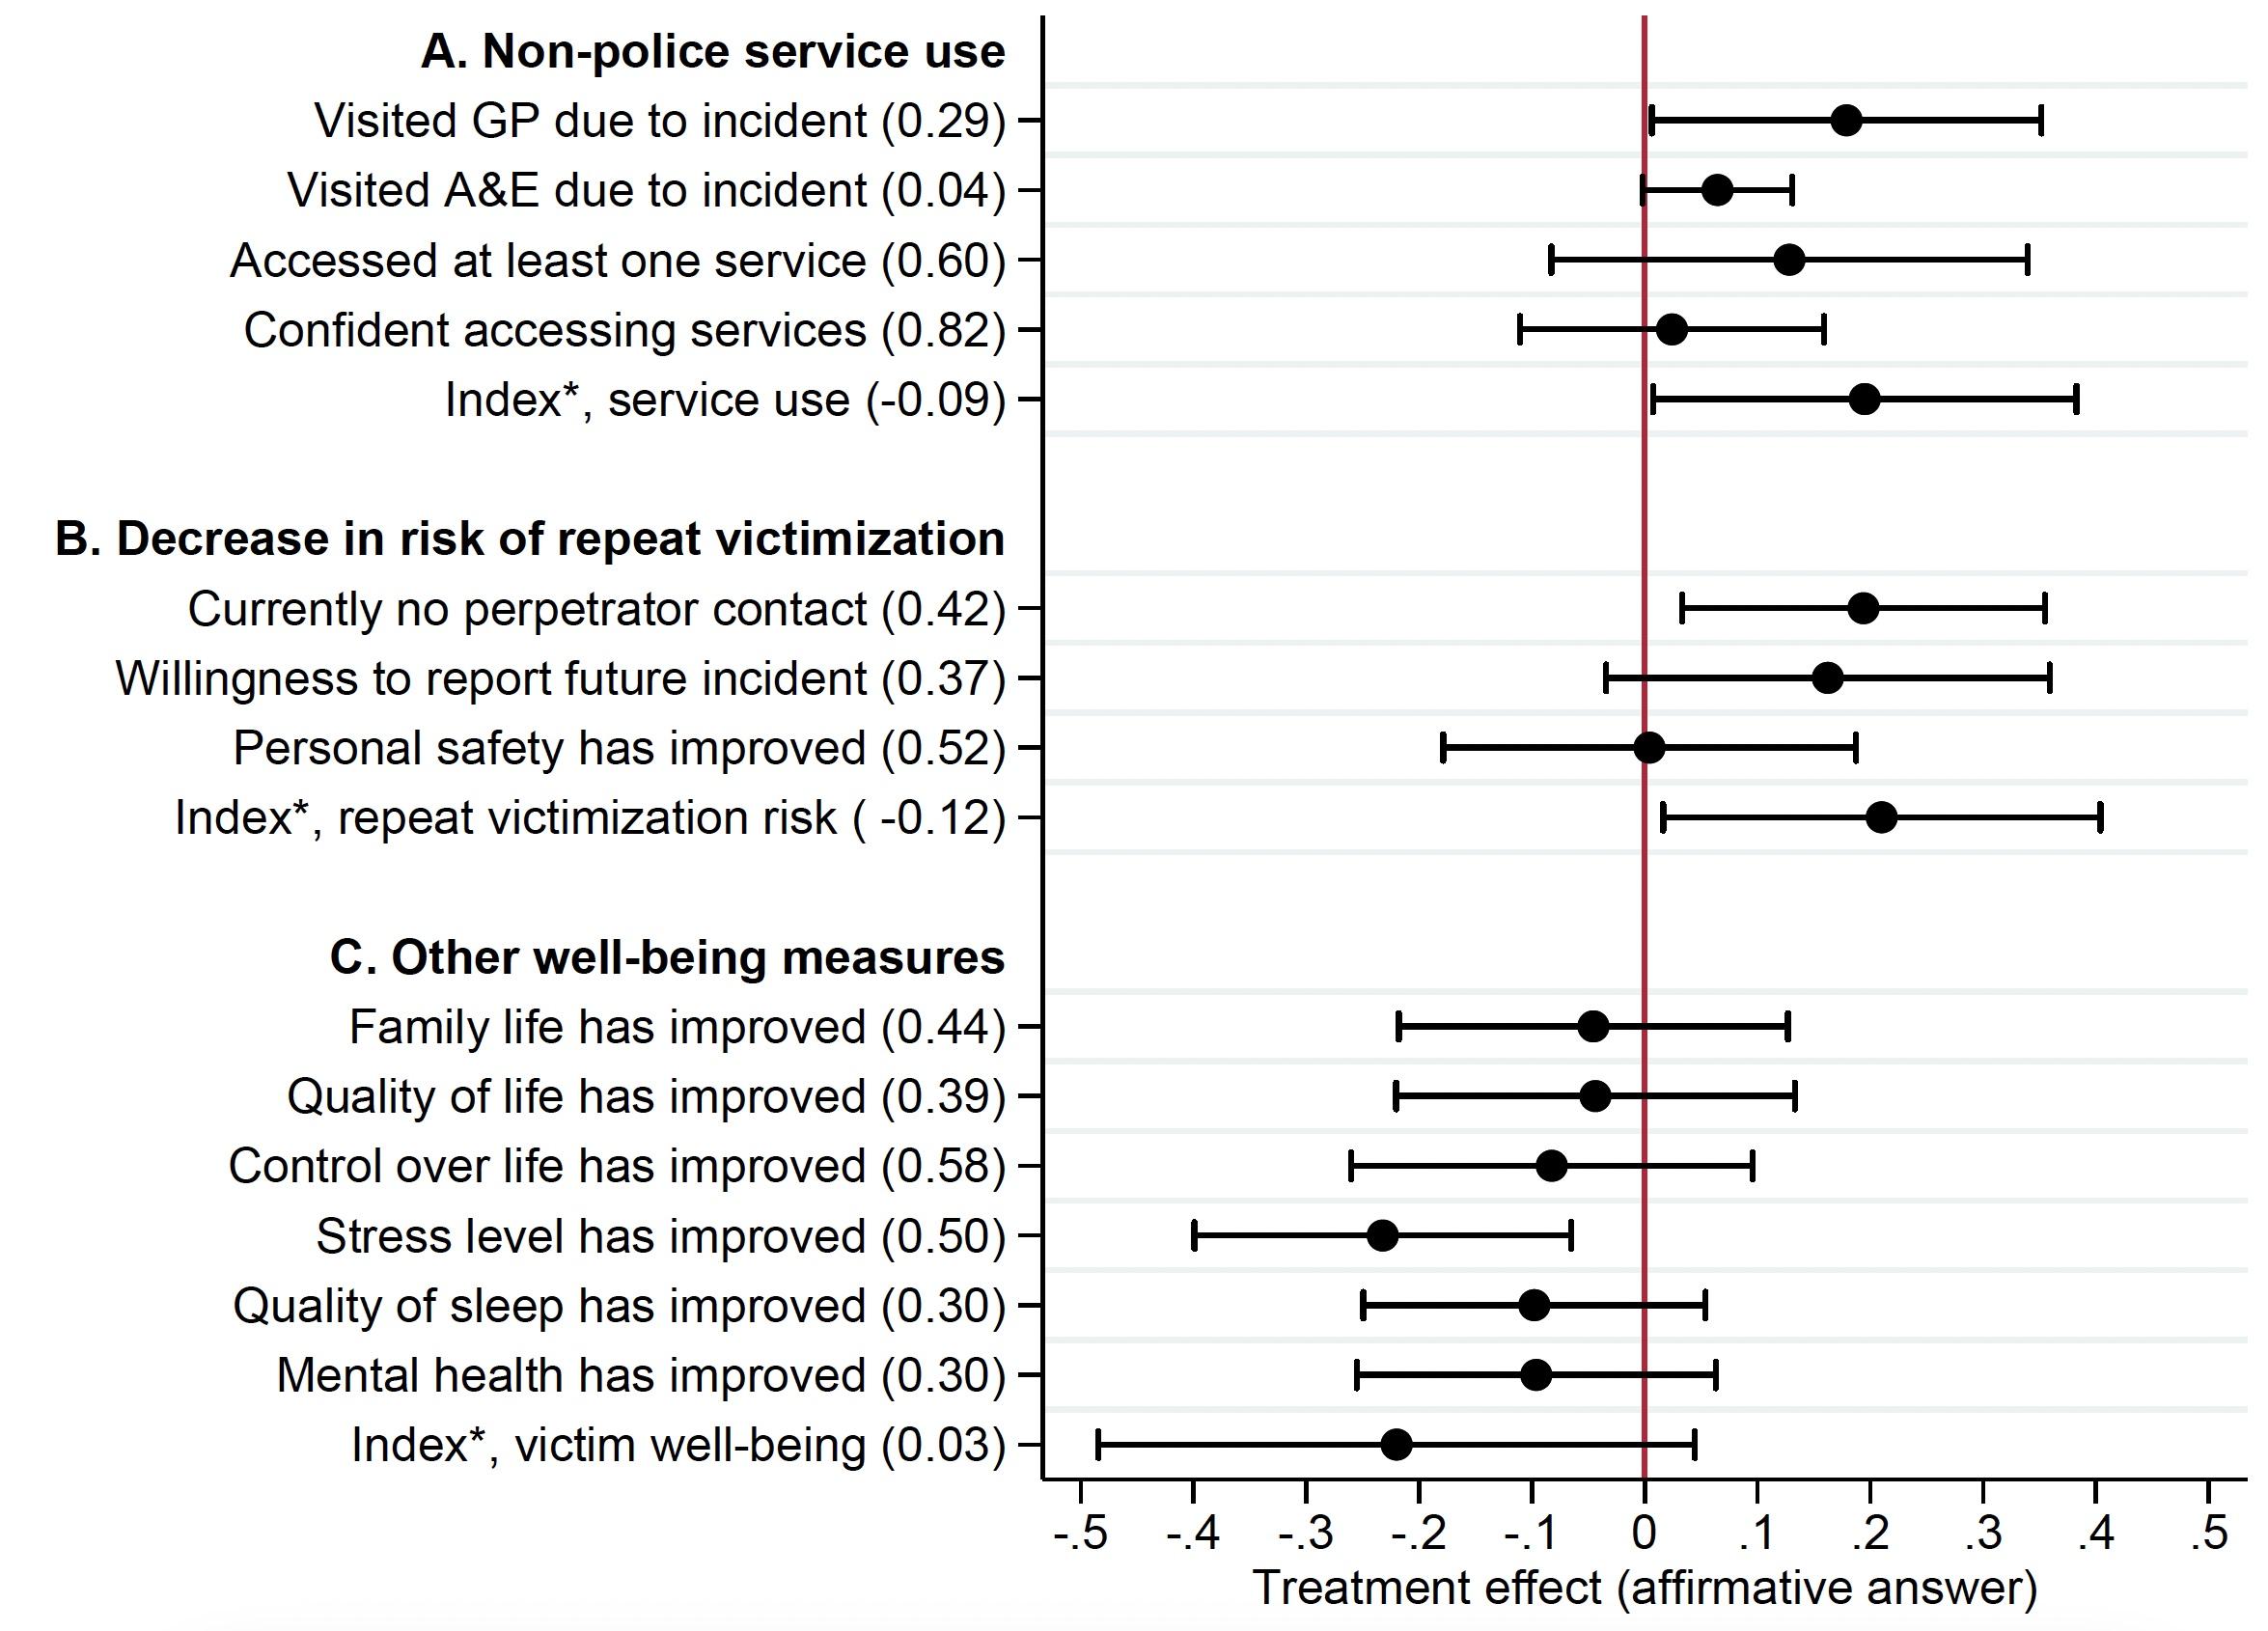 Figure 2 Non-police services and victim wellbeing one month after intervention